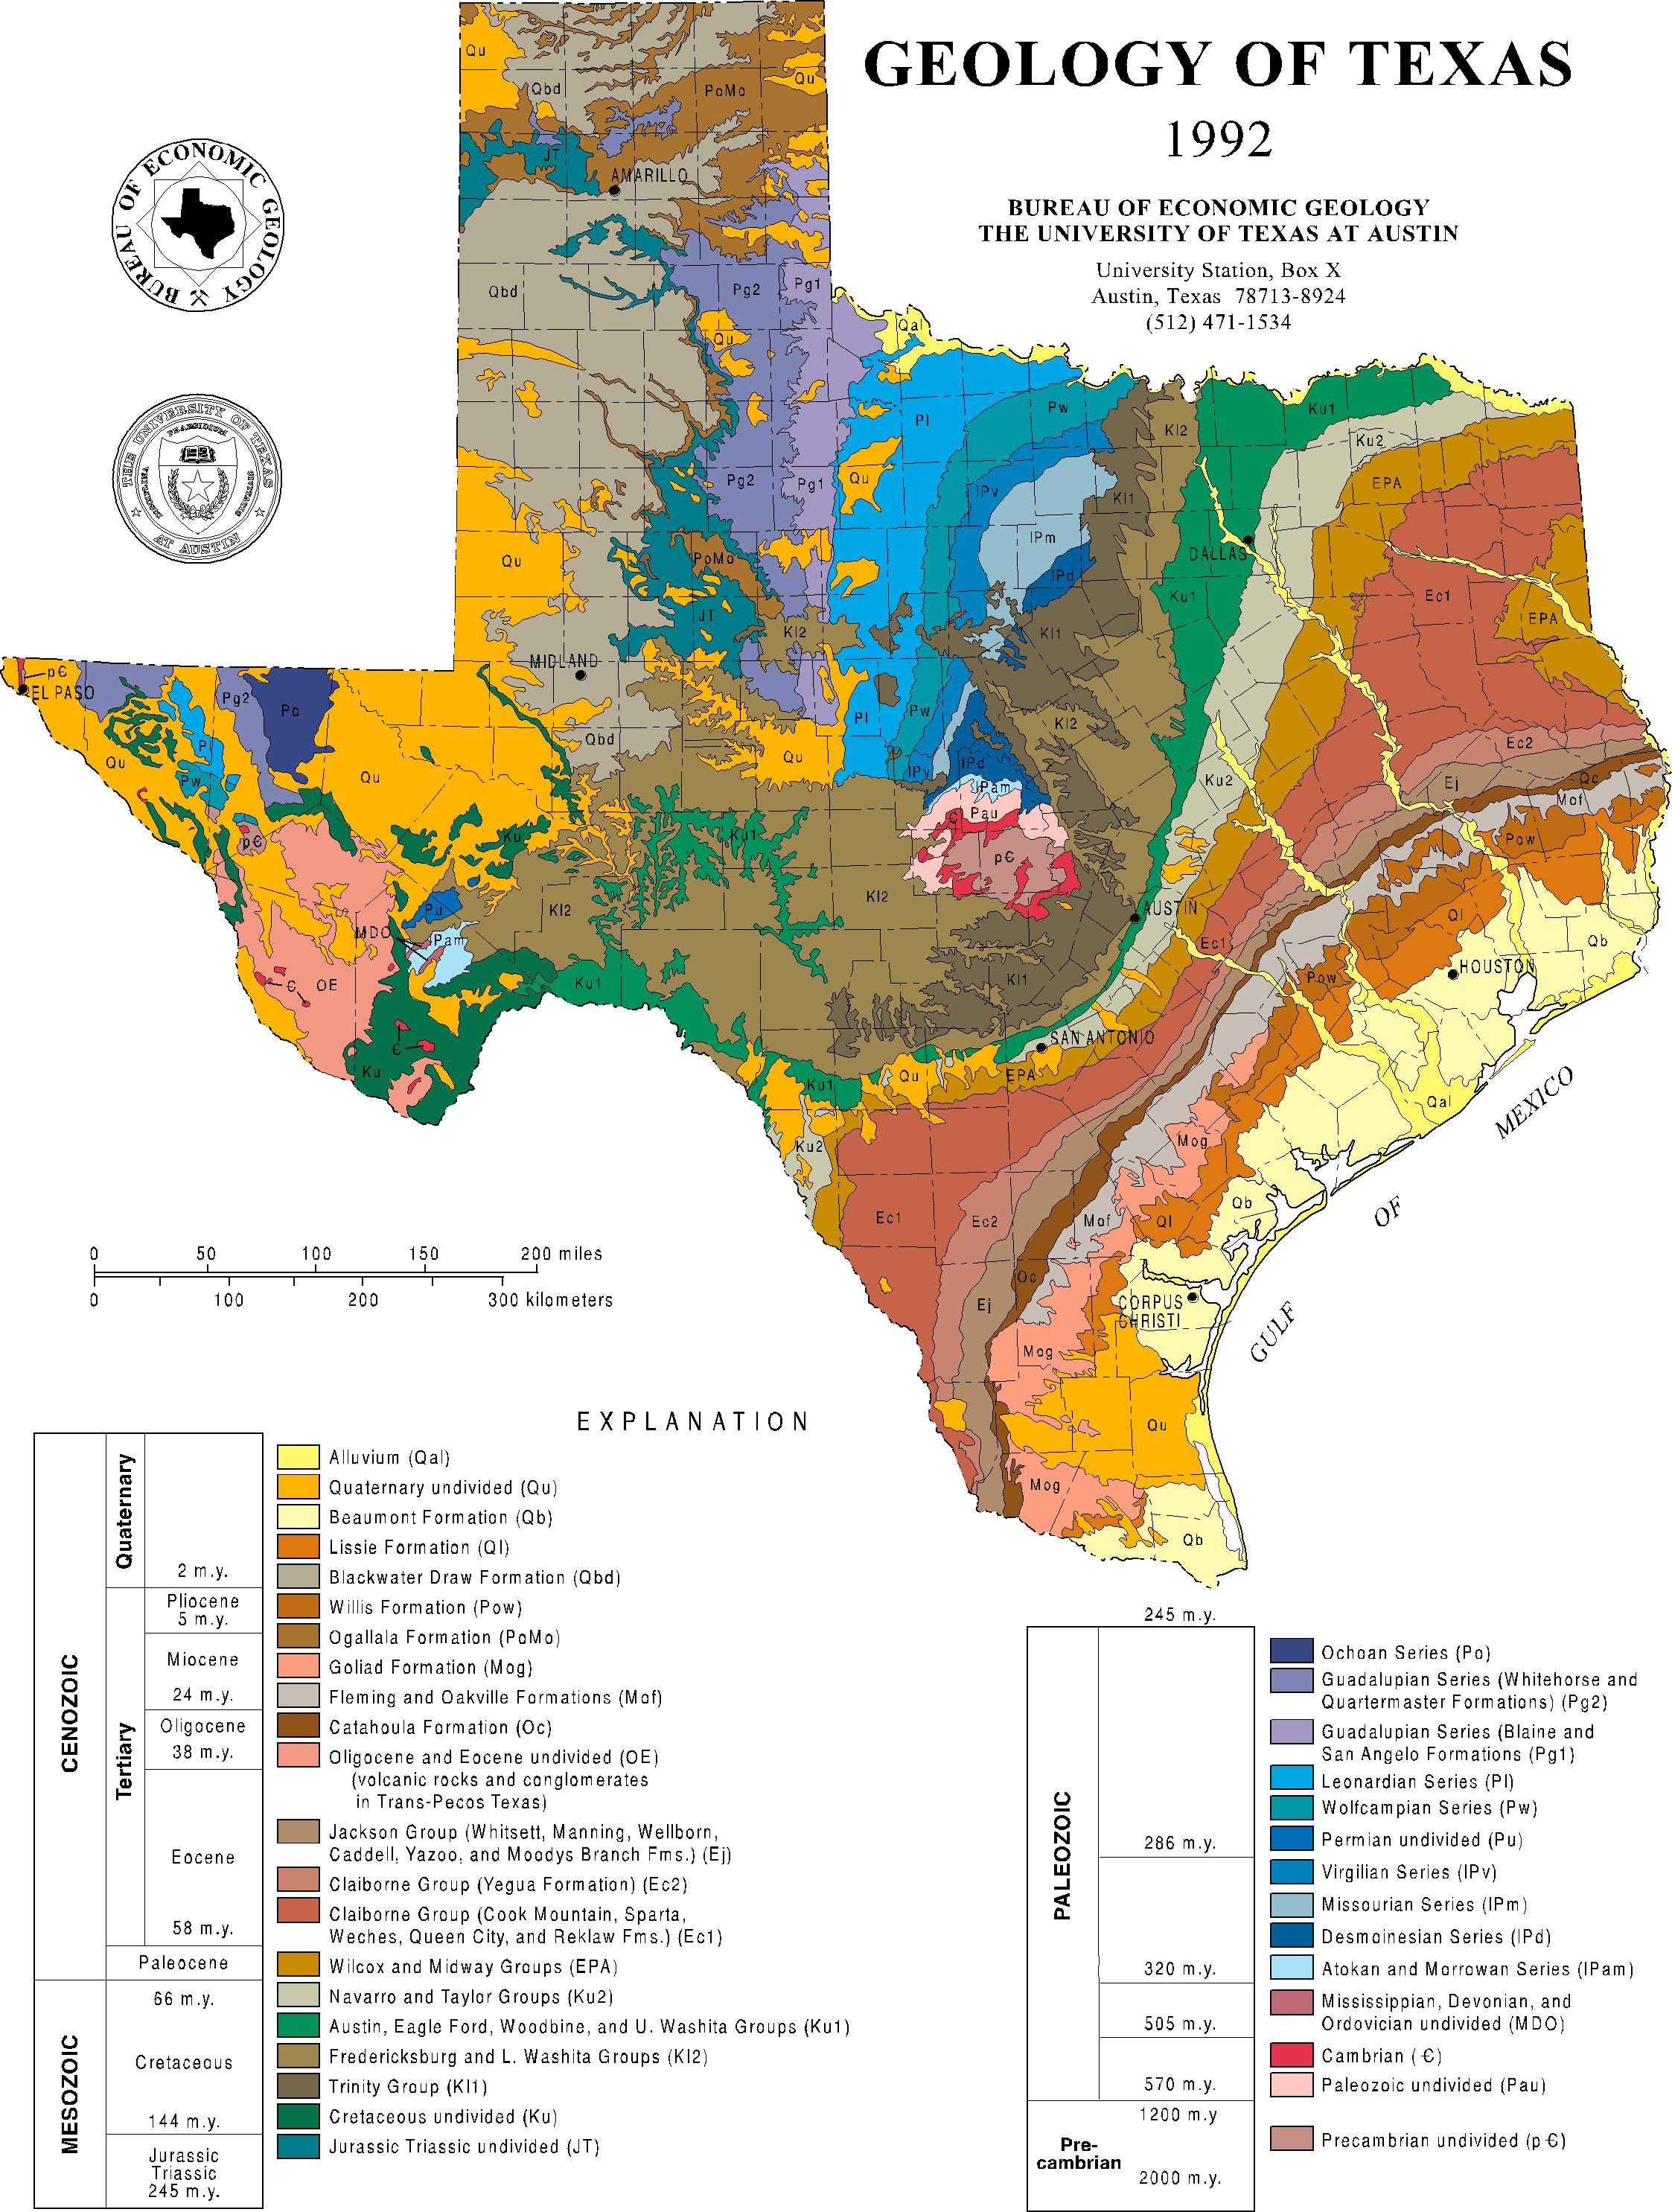 1992 Geologic Map Of Texas [2246X2971] : Mapporn - Texas Geological Survey Maps